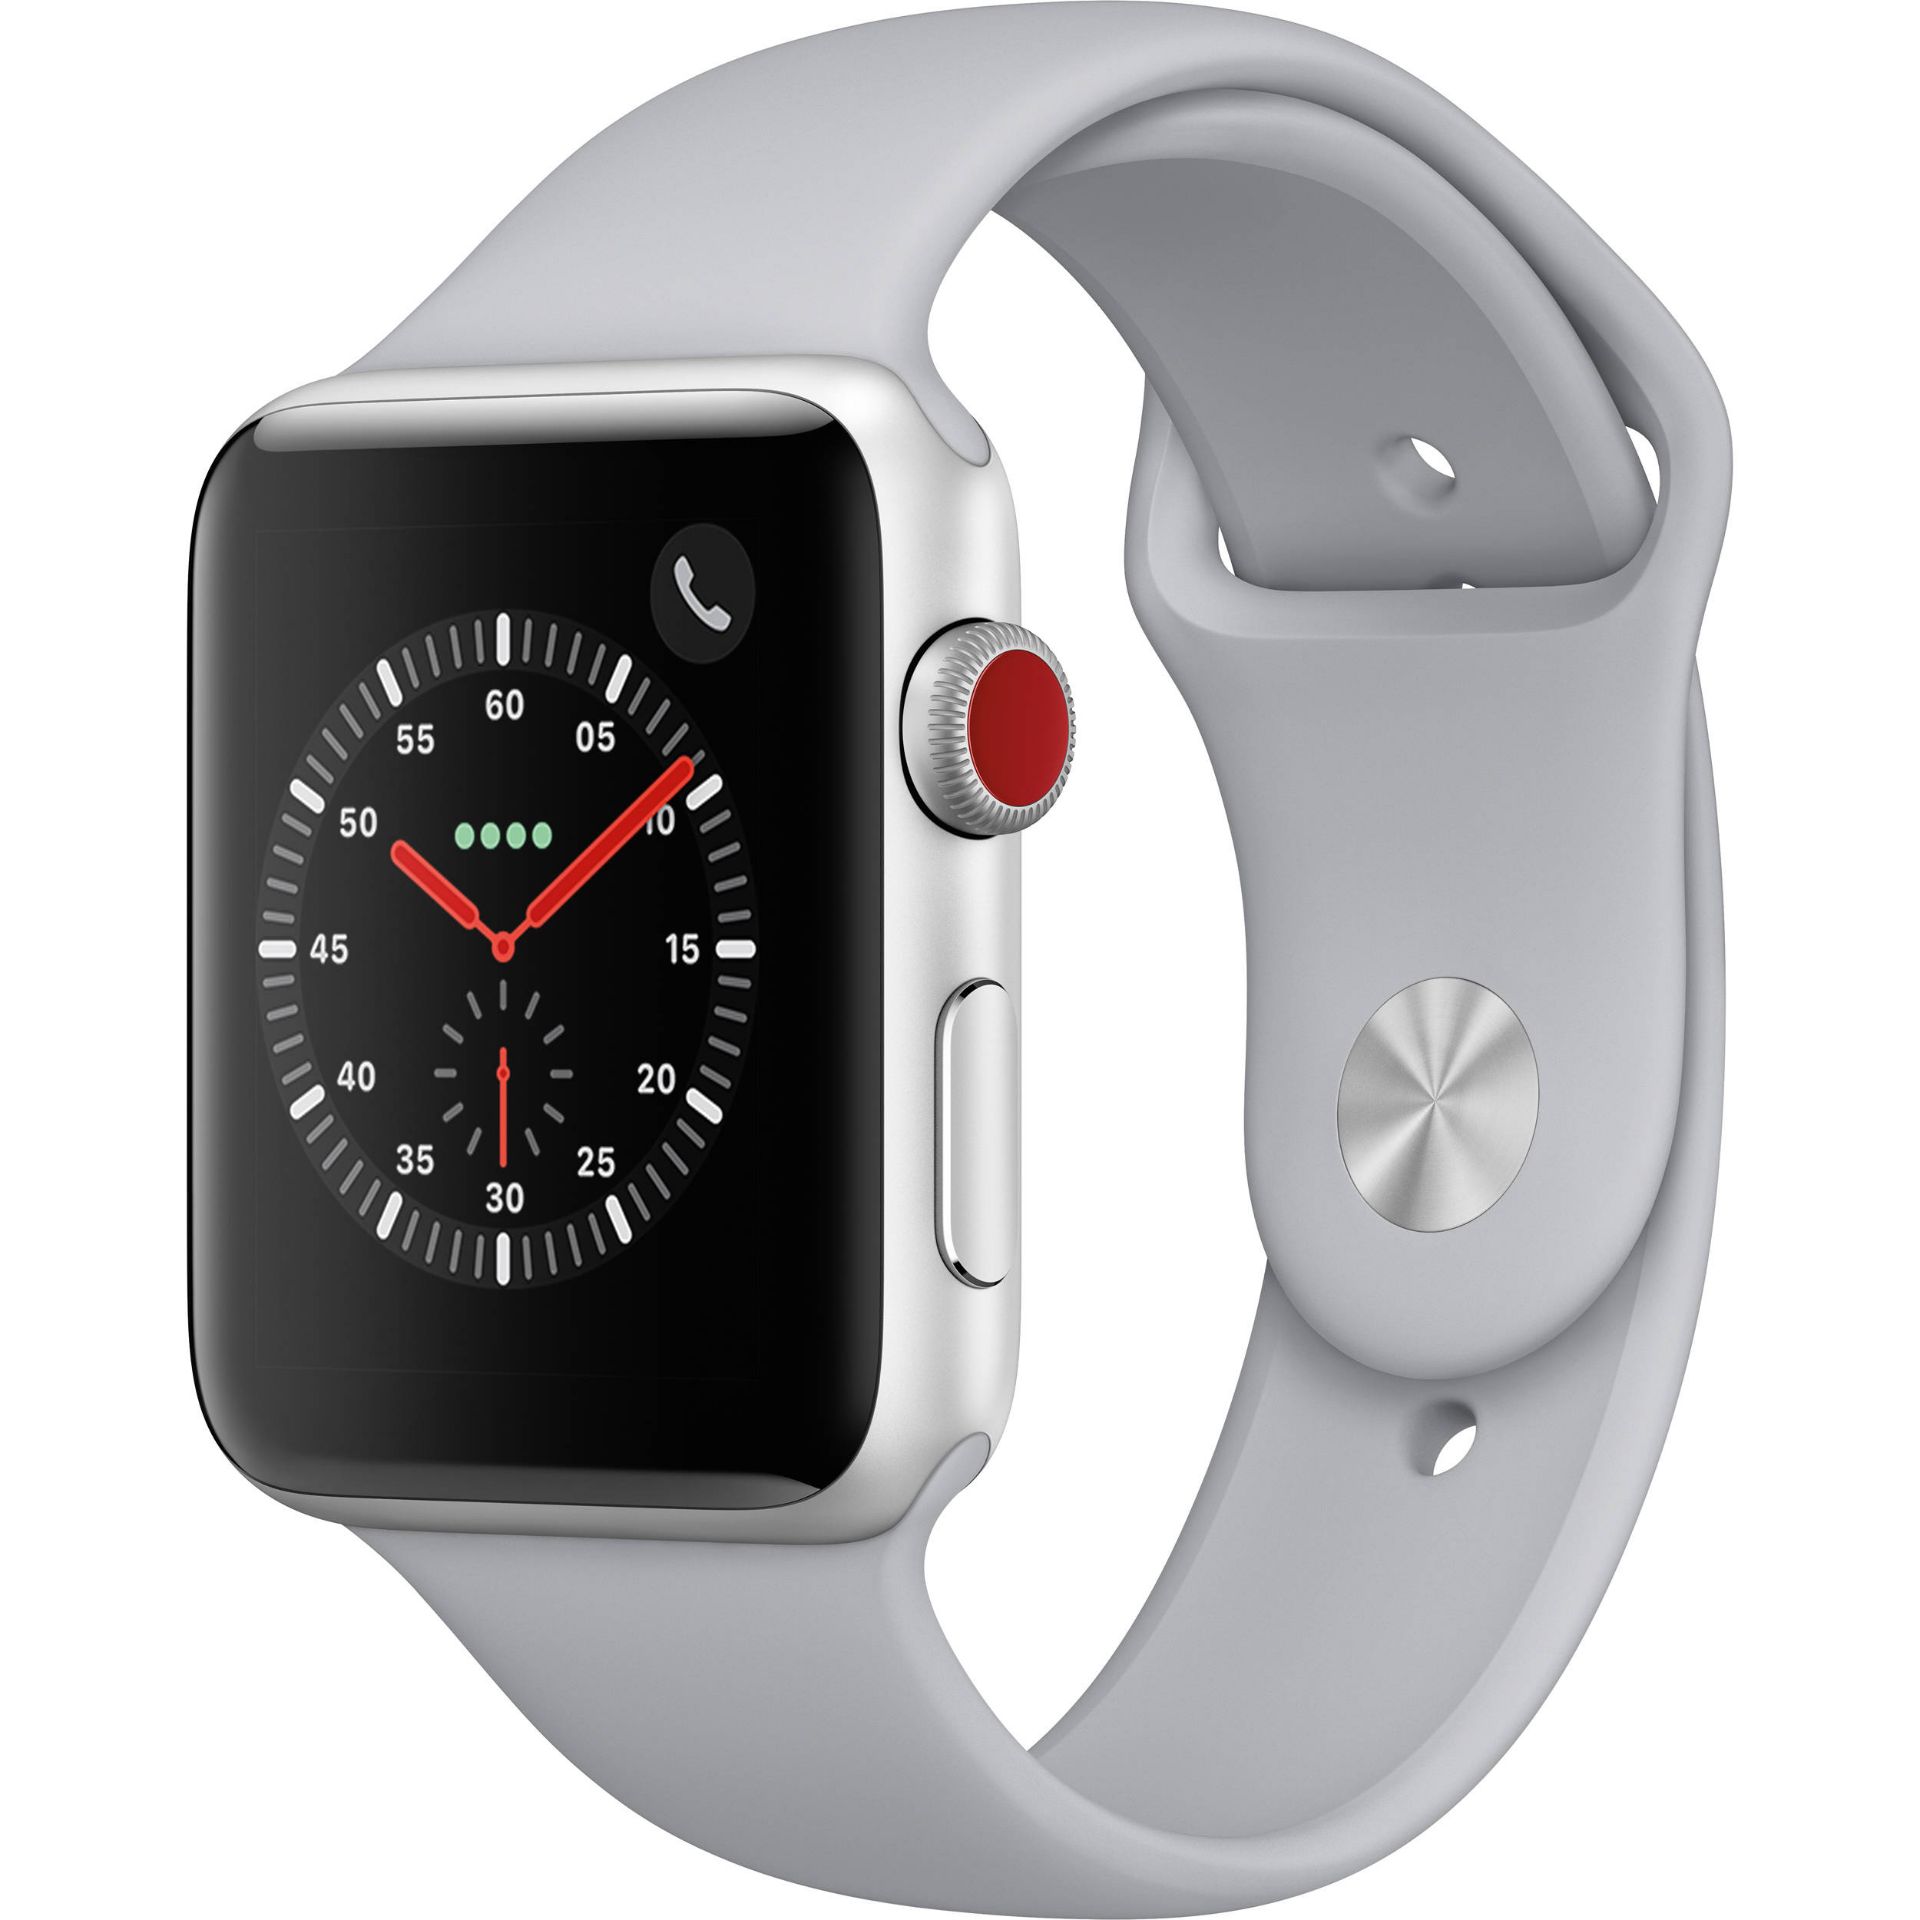 V Brand New Apple Watch Series 3 42mm Silver + Cellular (Brand New Accessories + Strap + Retail Box)